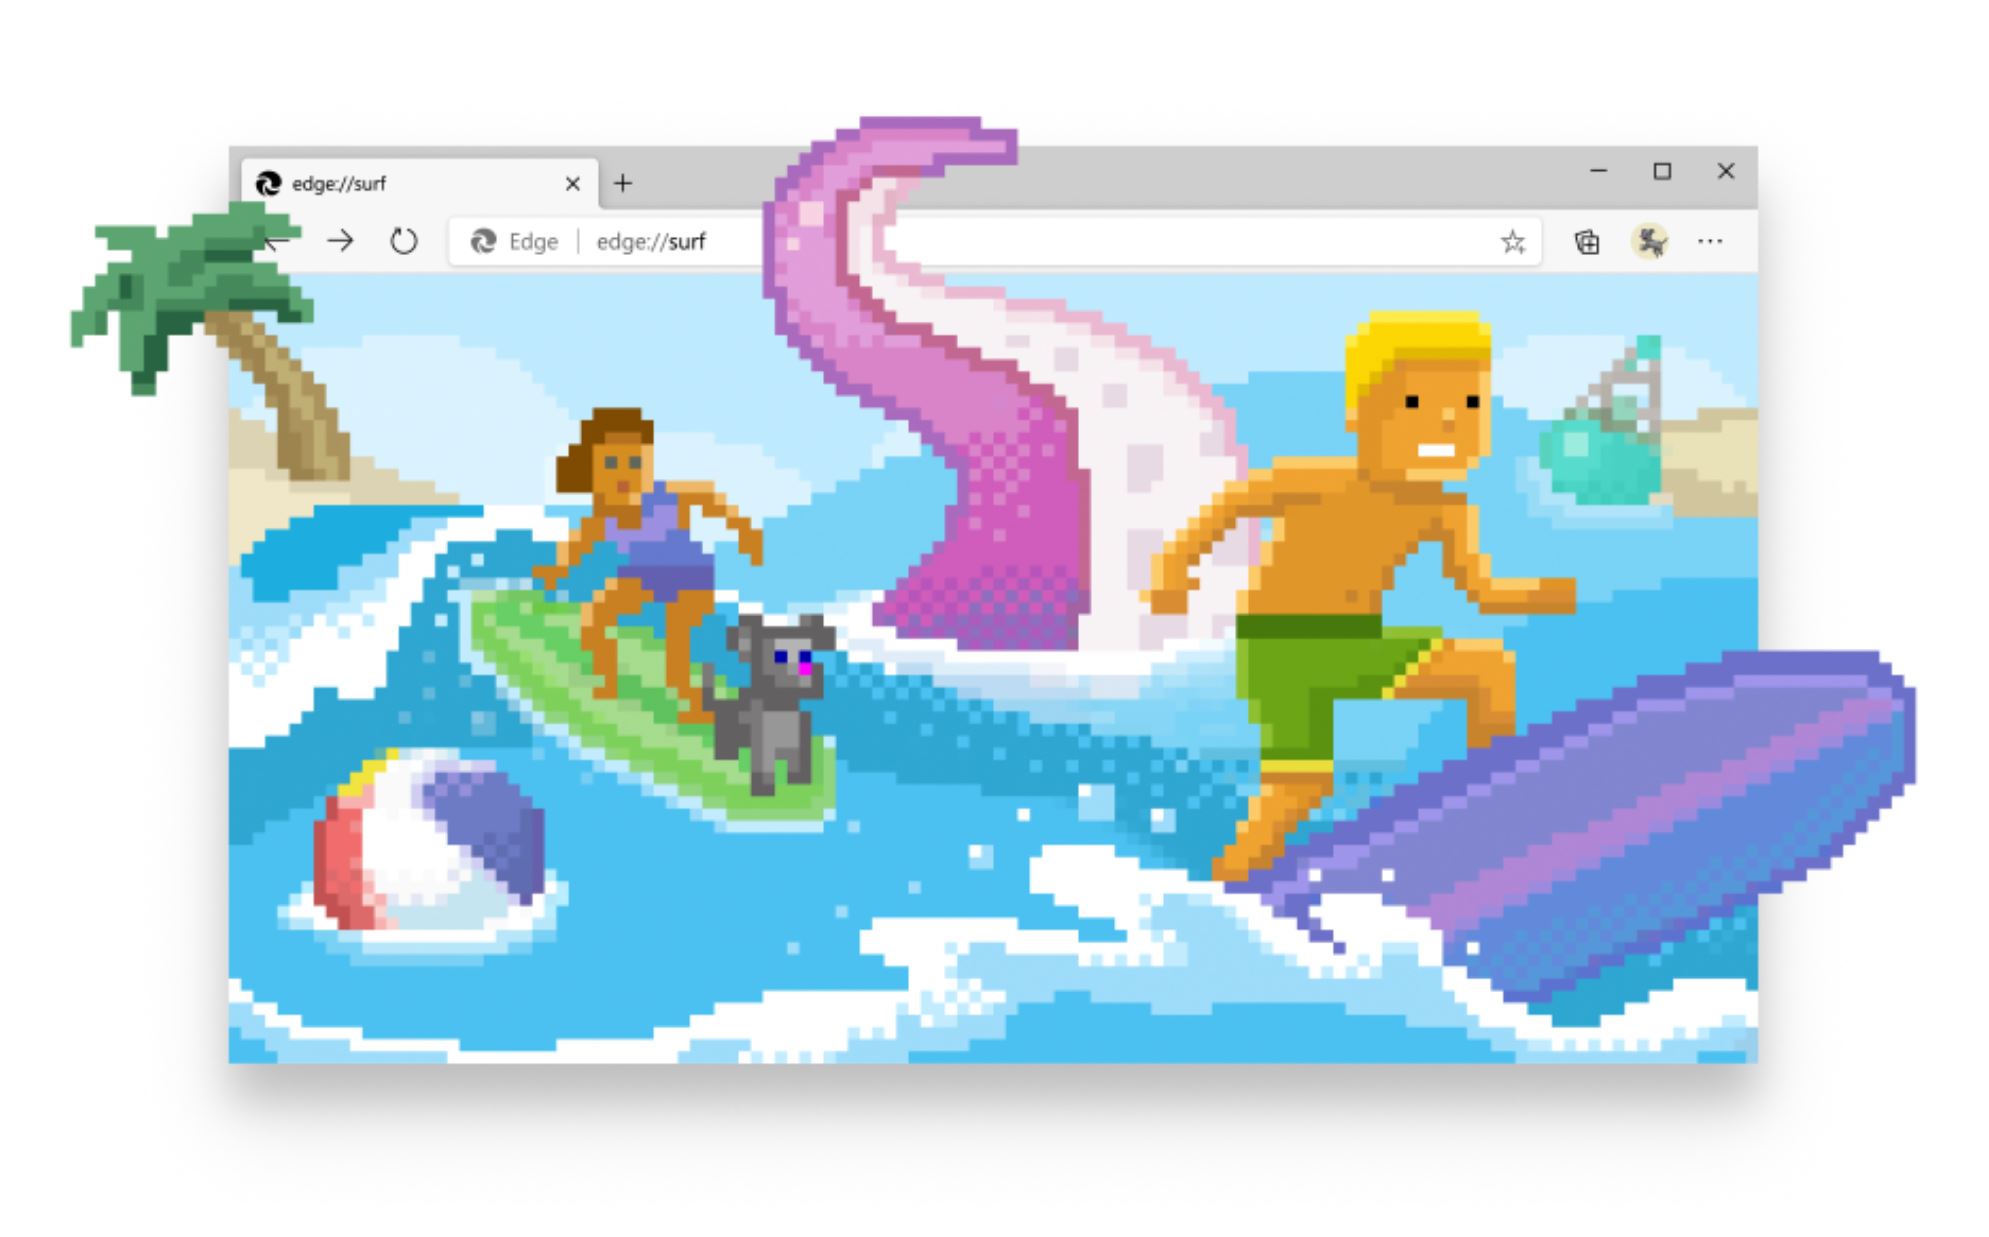 The new surf game in Microsoft Edge now available for everyone